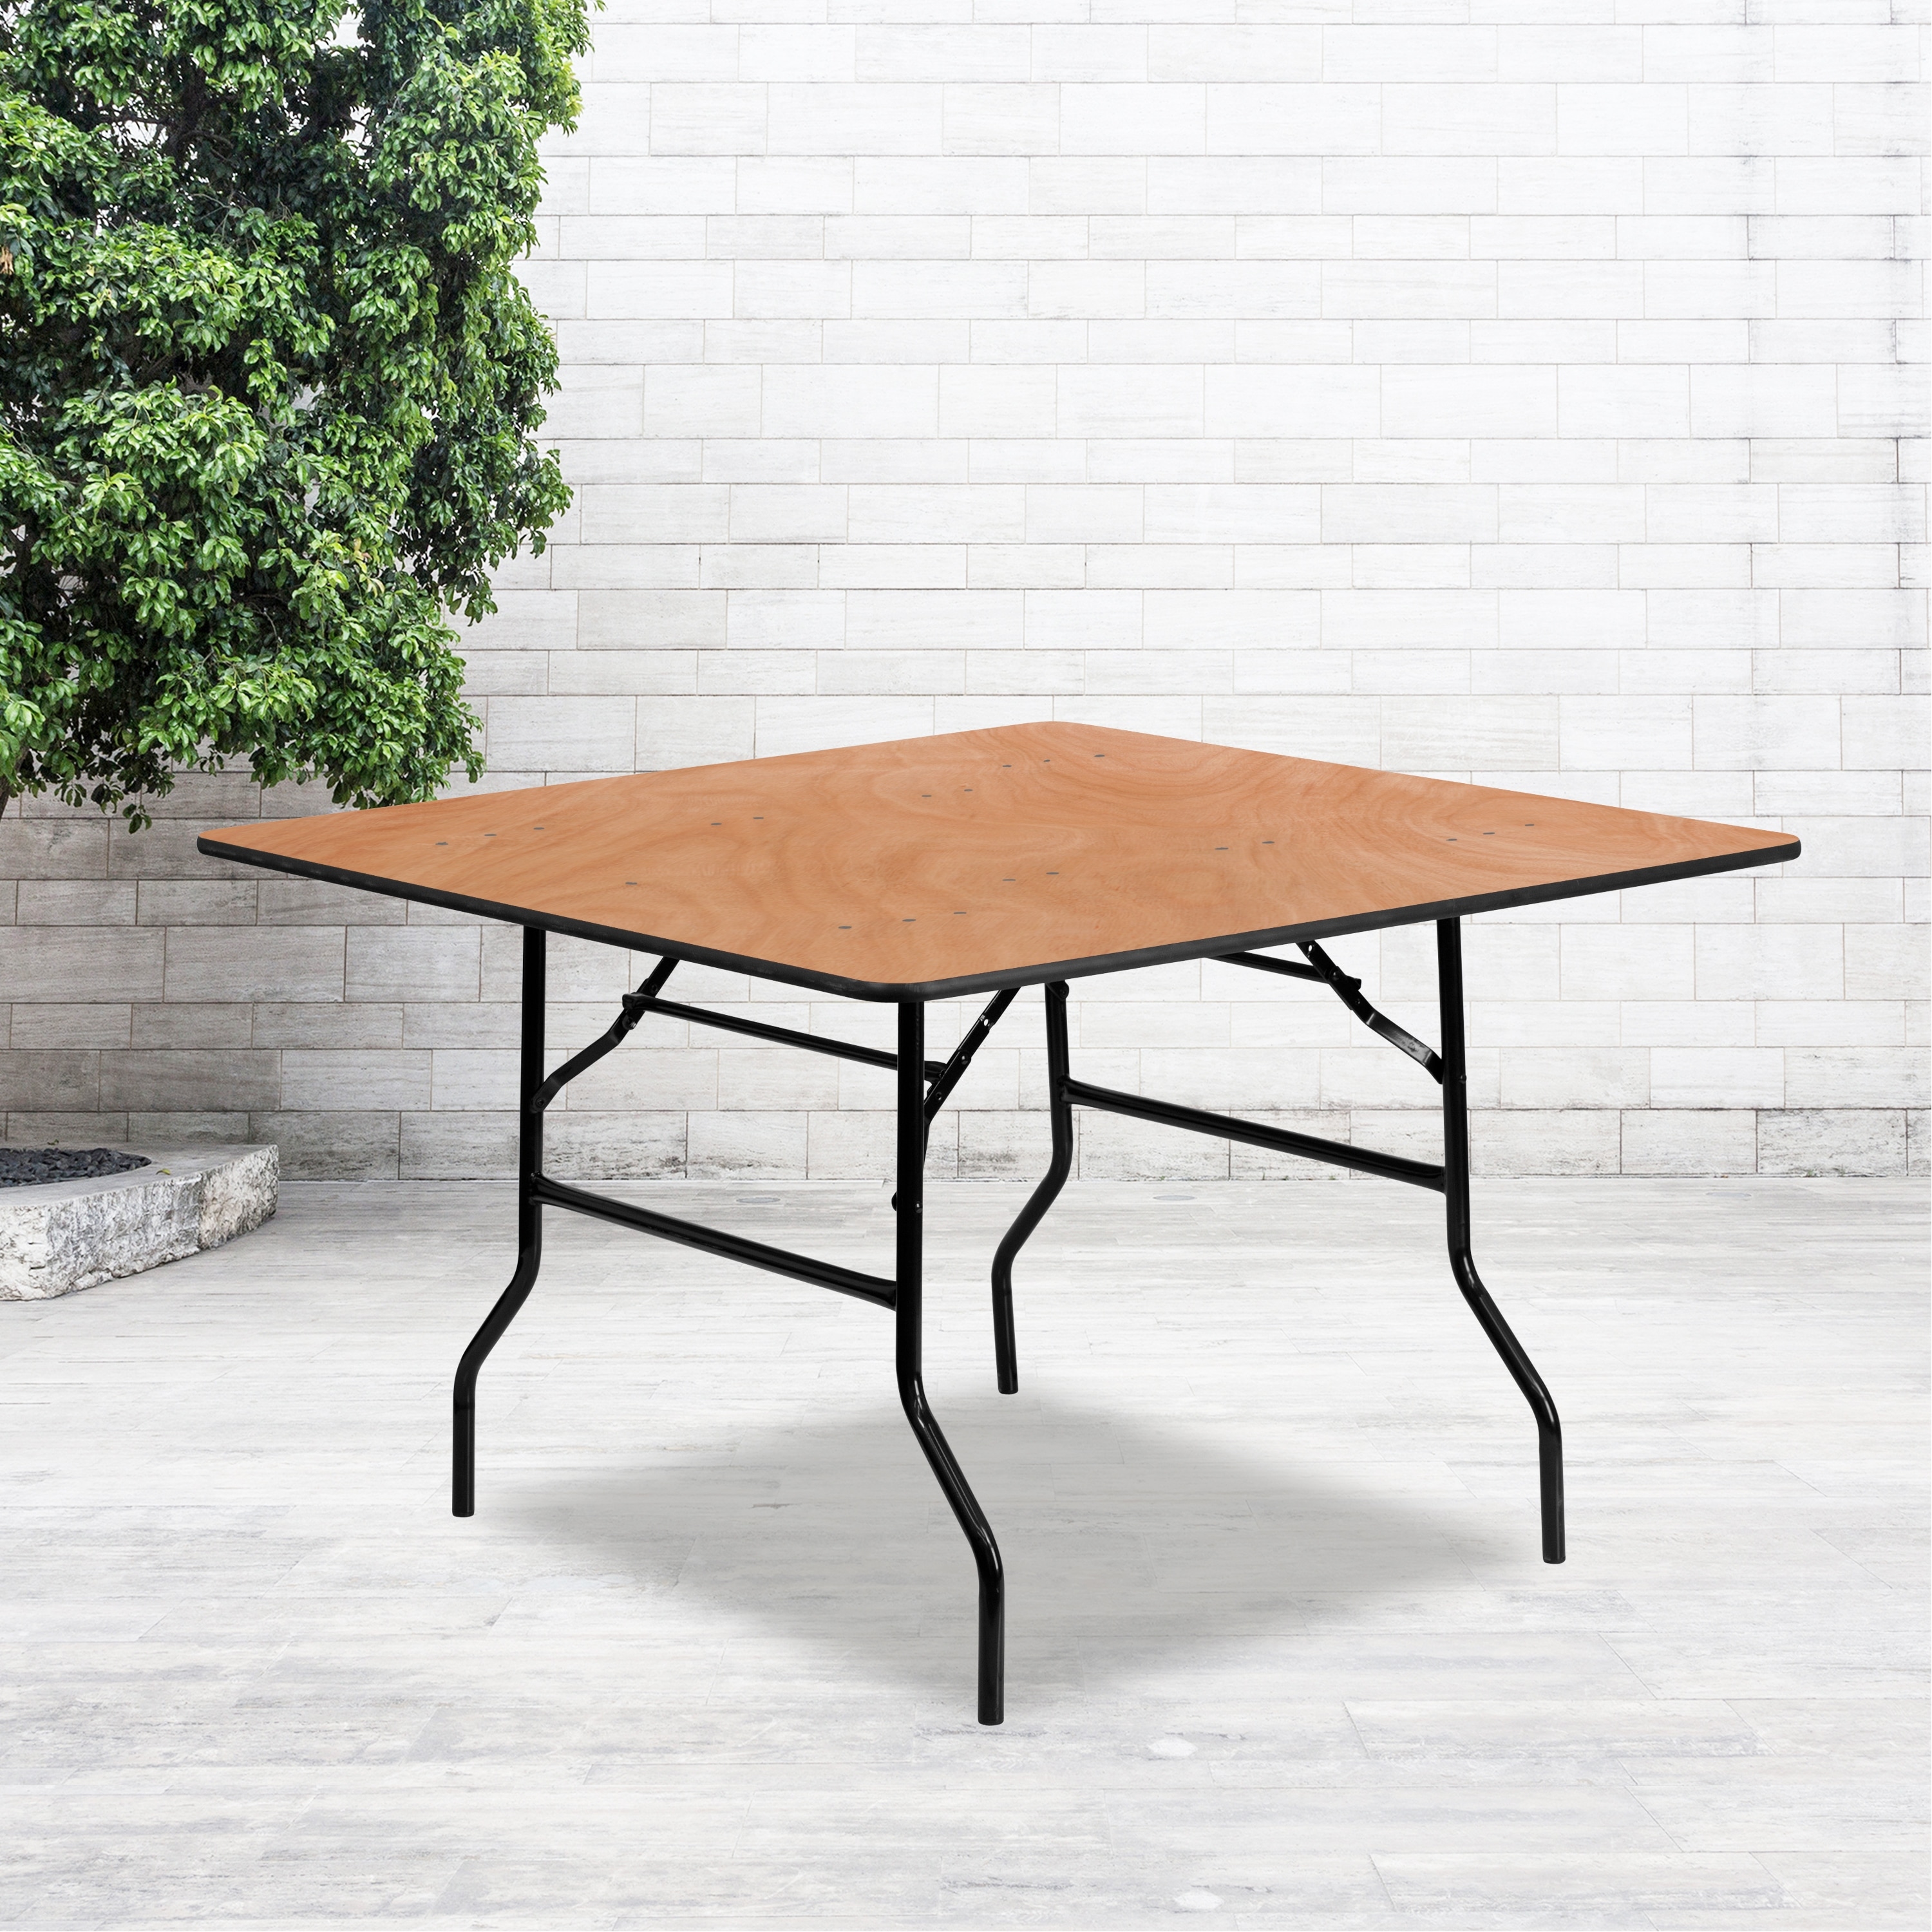 https://ak1.ostkcdn.com/images/products/is/images/direct/c5cd7a460028413c8cc23813fd11a86d1fc58a9a/48-inch-Square-Wood-Folding-Banquet-Table.jpg